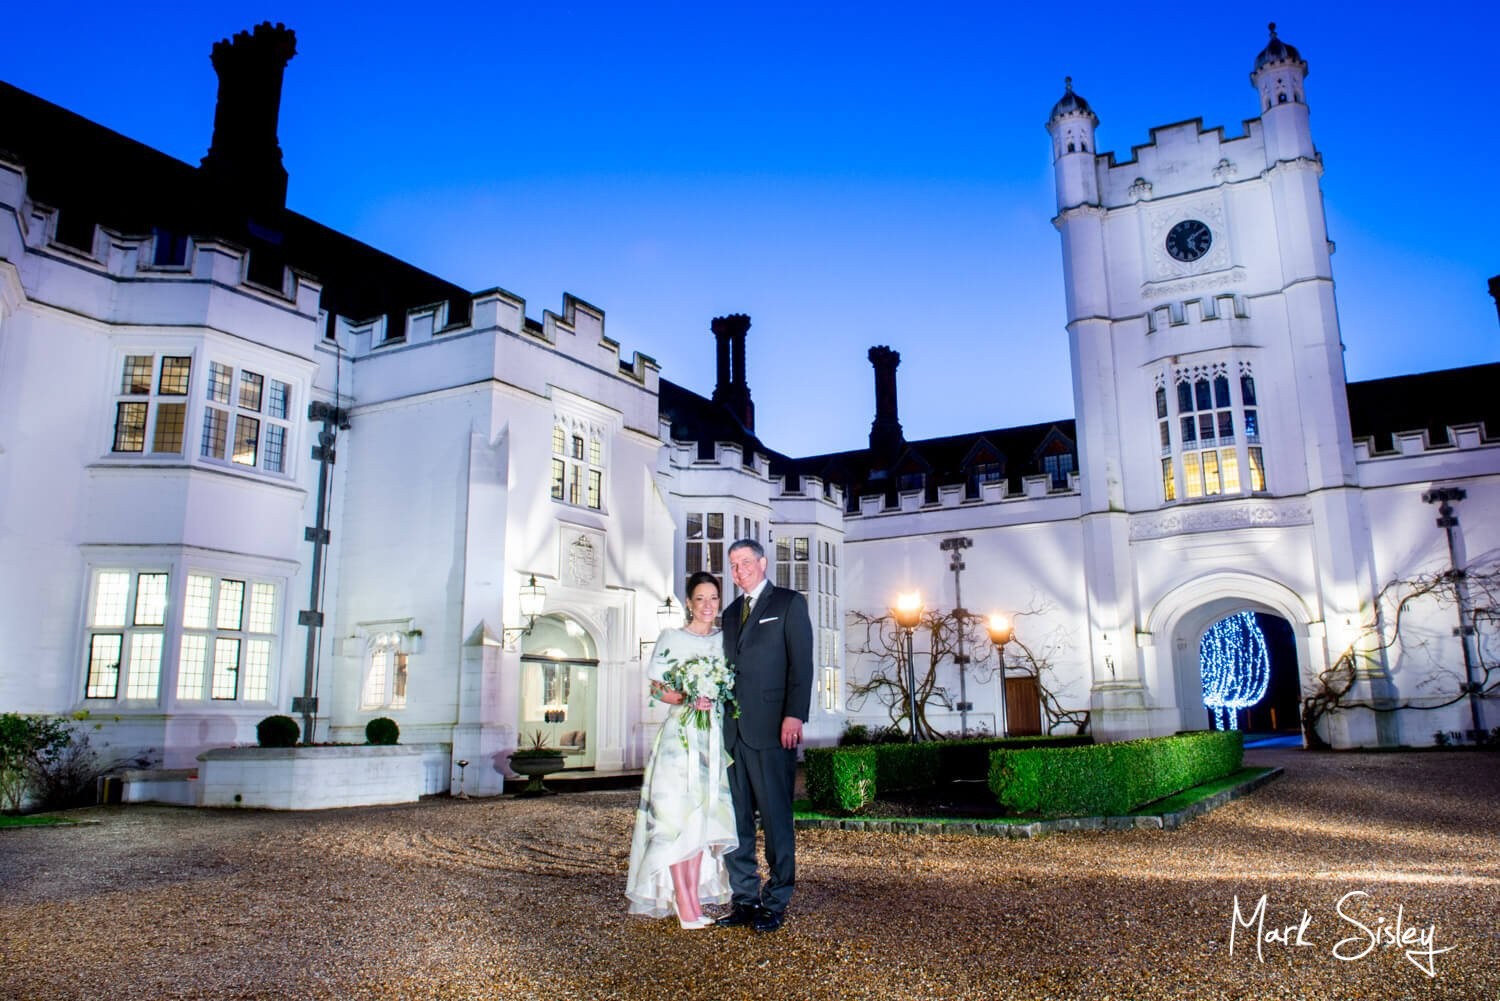 Danesfield House wedding photography at dusk in the entrance courtyard